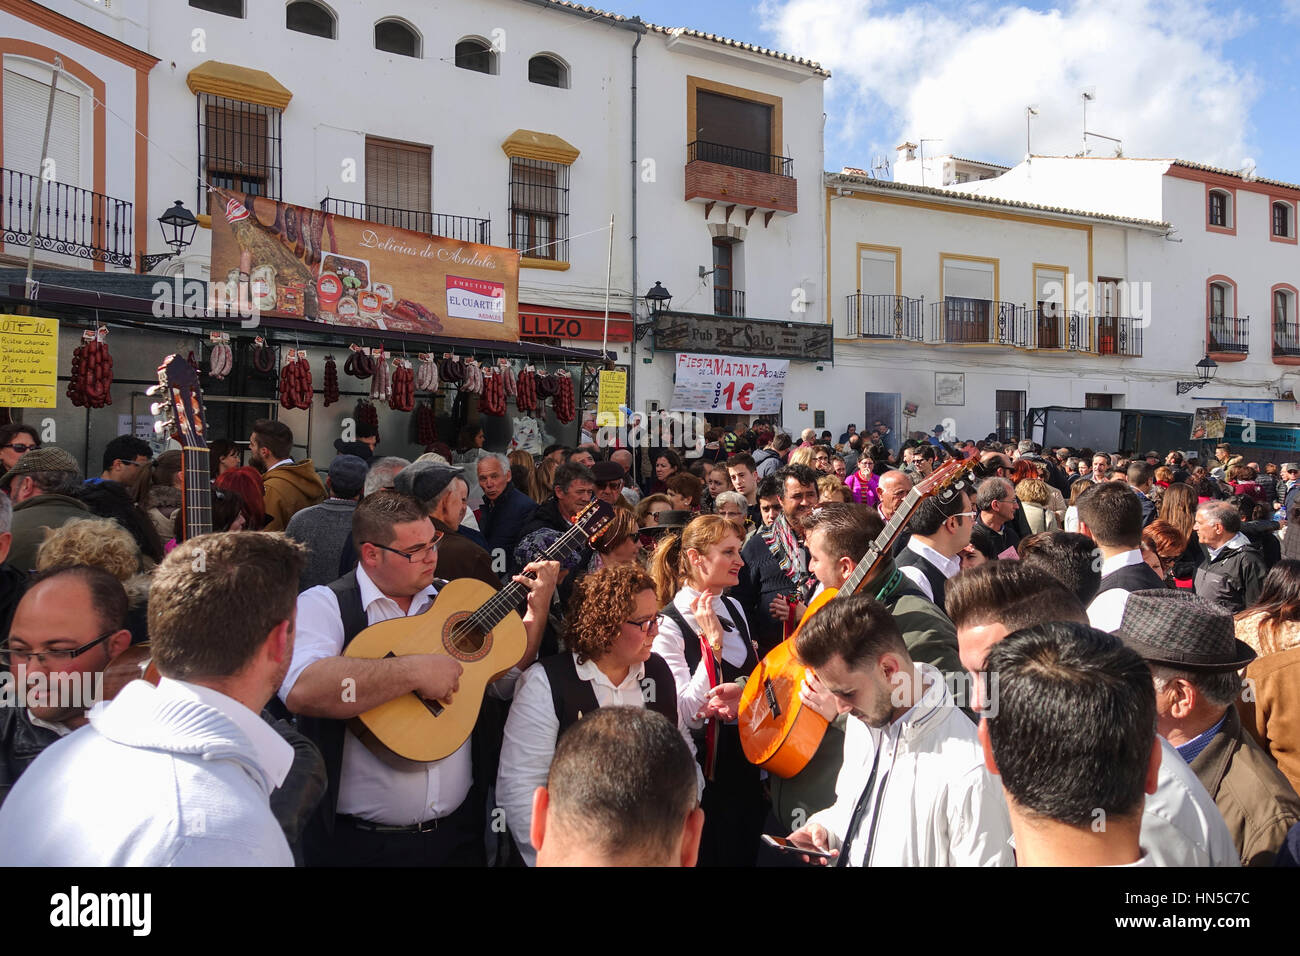 Crowd at Fiesta de matanza, Playing verdiales, Annual Celebrations in Ardales.Andalusia, Spain. Stock Photo